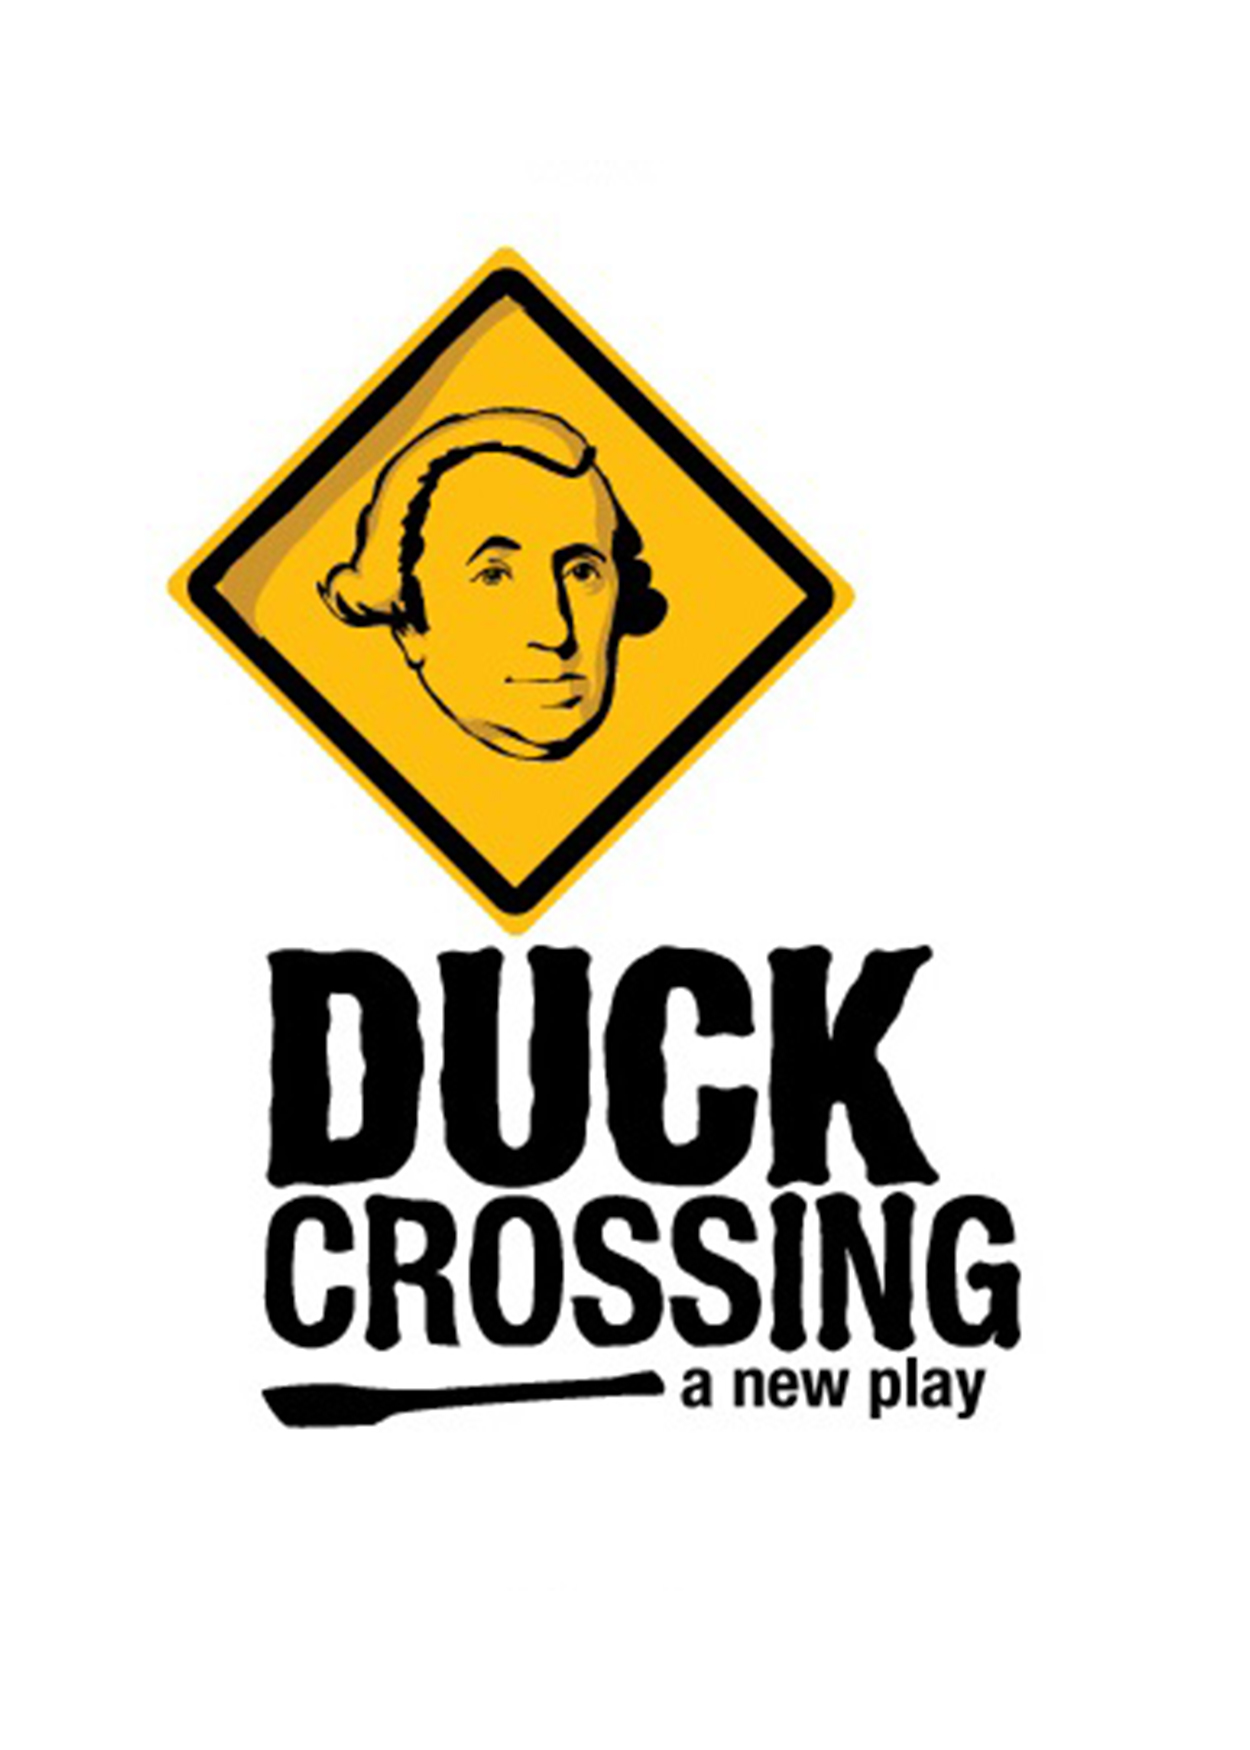 face of George Washington on a yellow crossing sign with title "Duck Crossing"